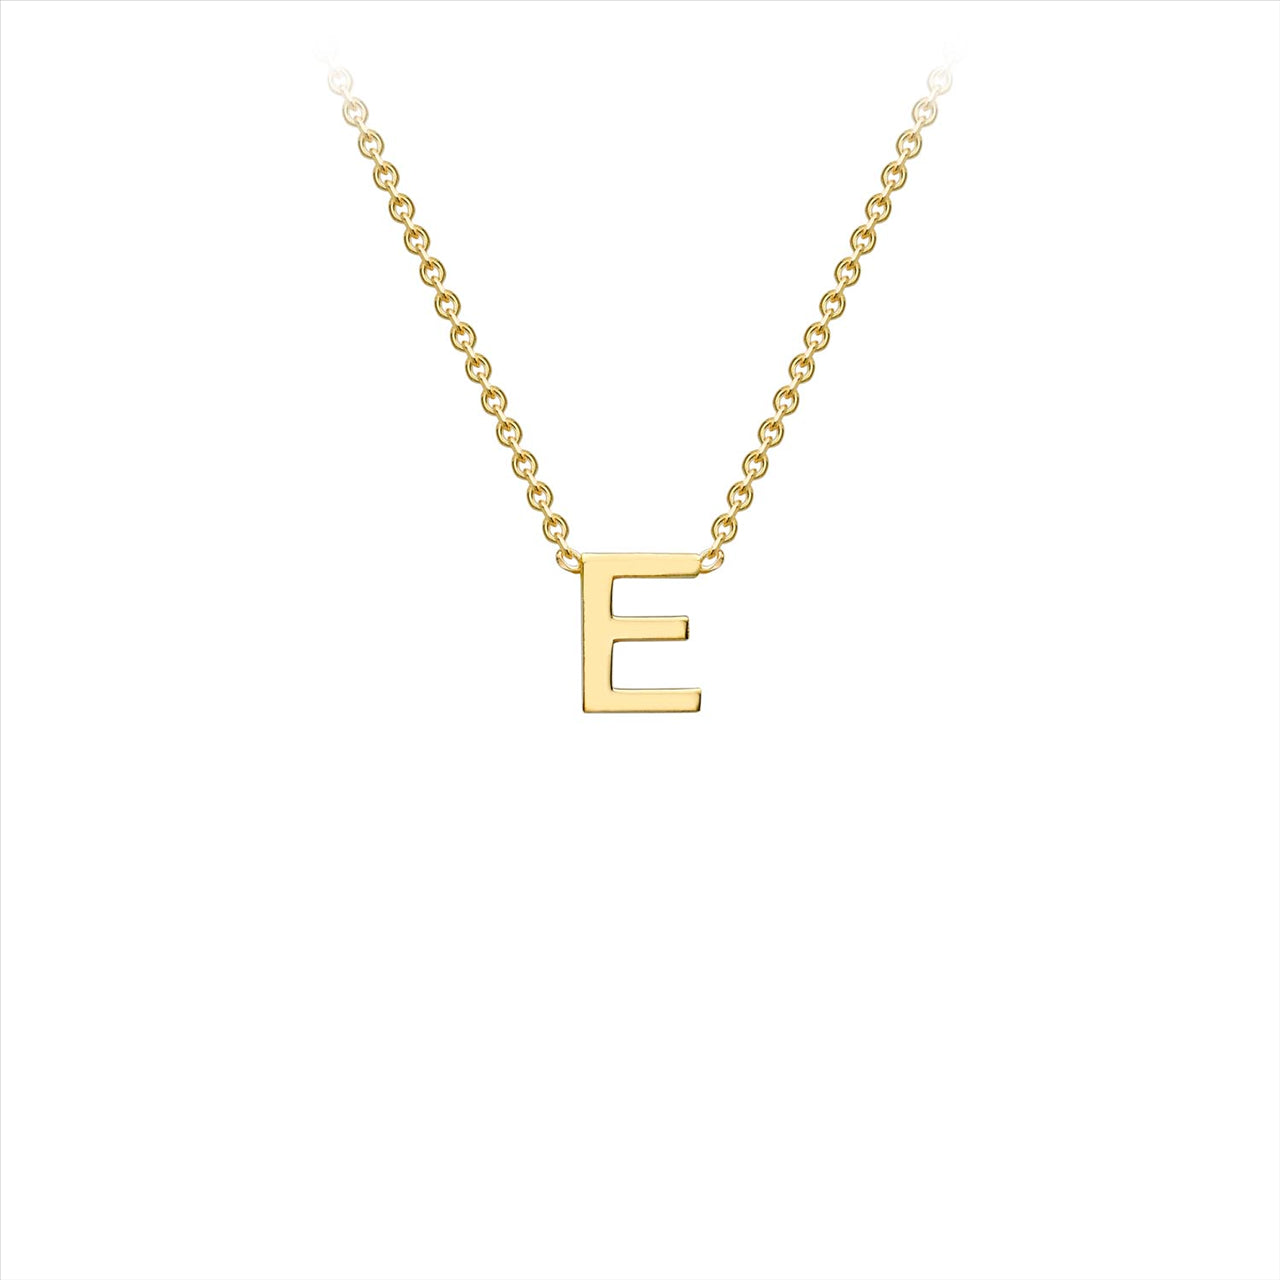 9K Yellow Gold 'E' Initial Adjustable Necklace 38cm-43cm